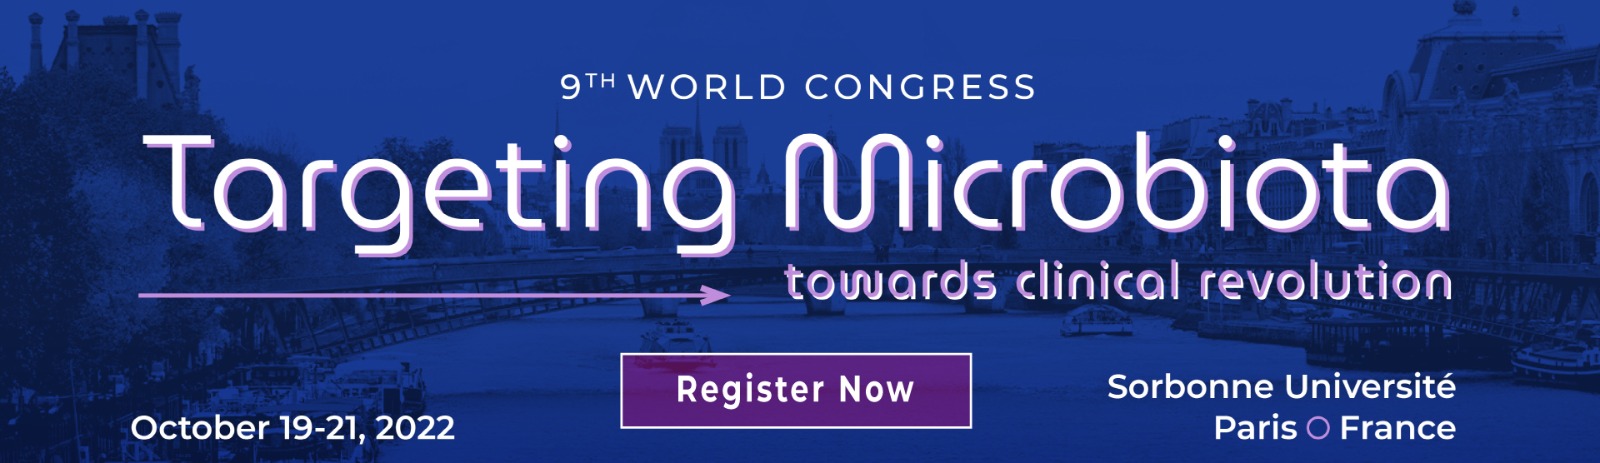 Attend Targeting Microbiota Online or In-person